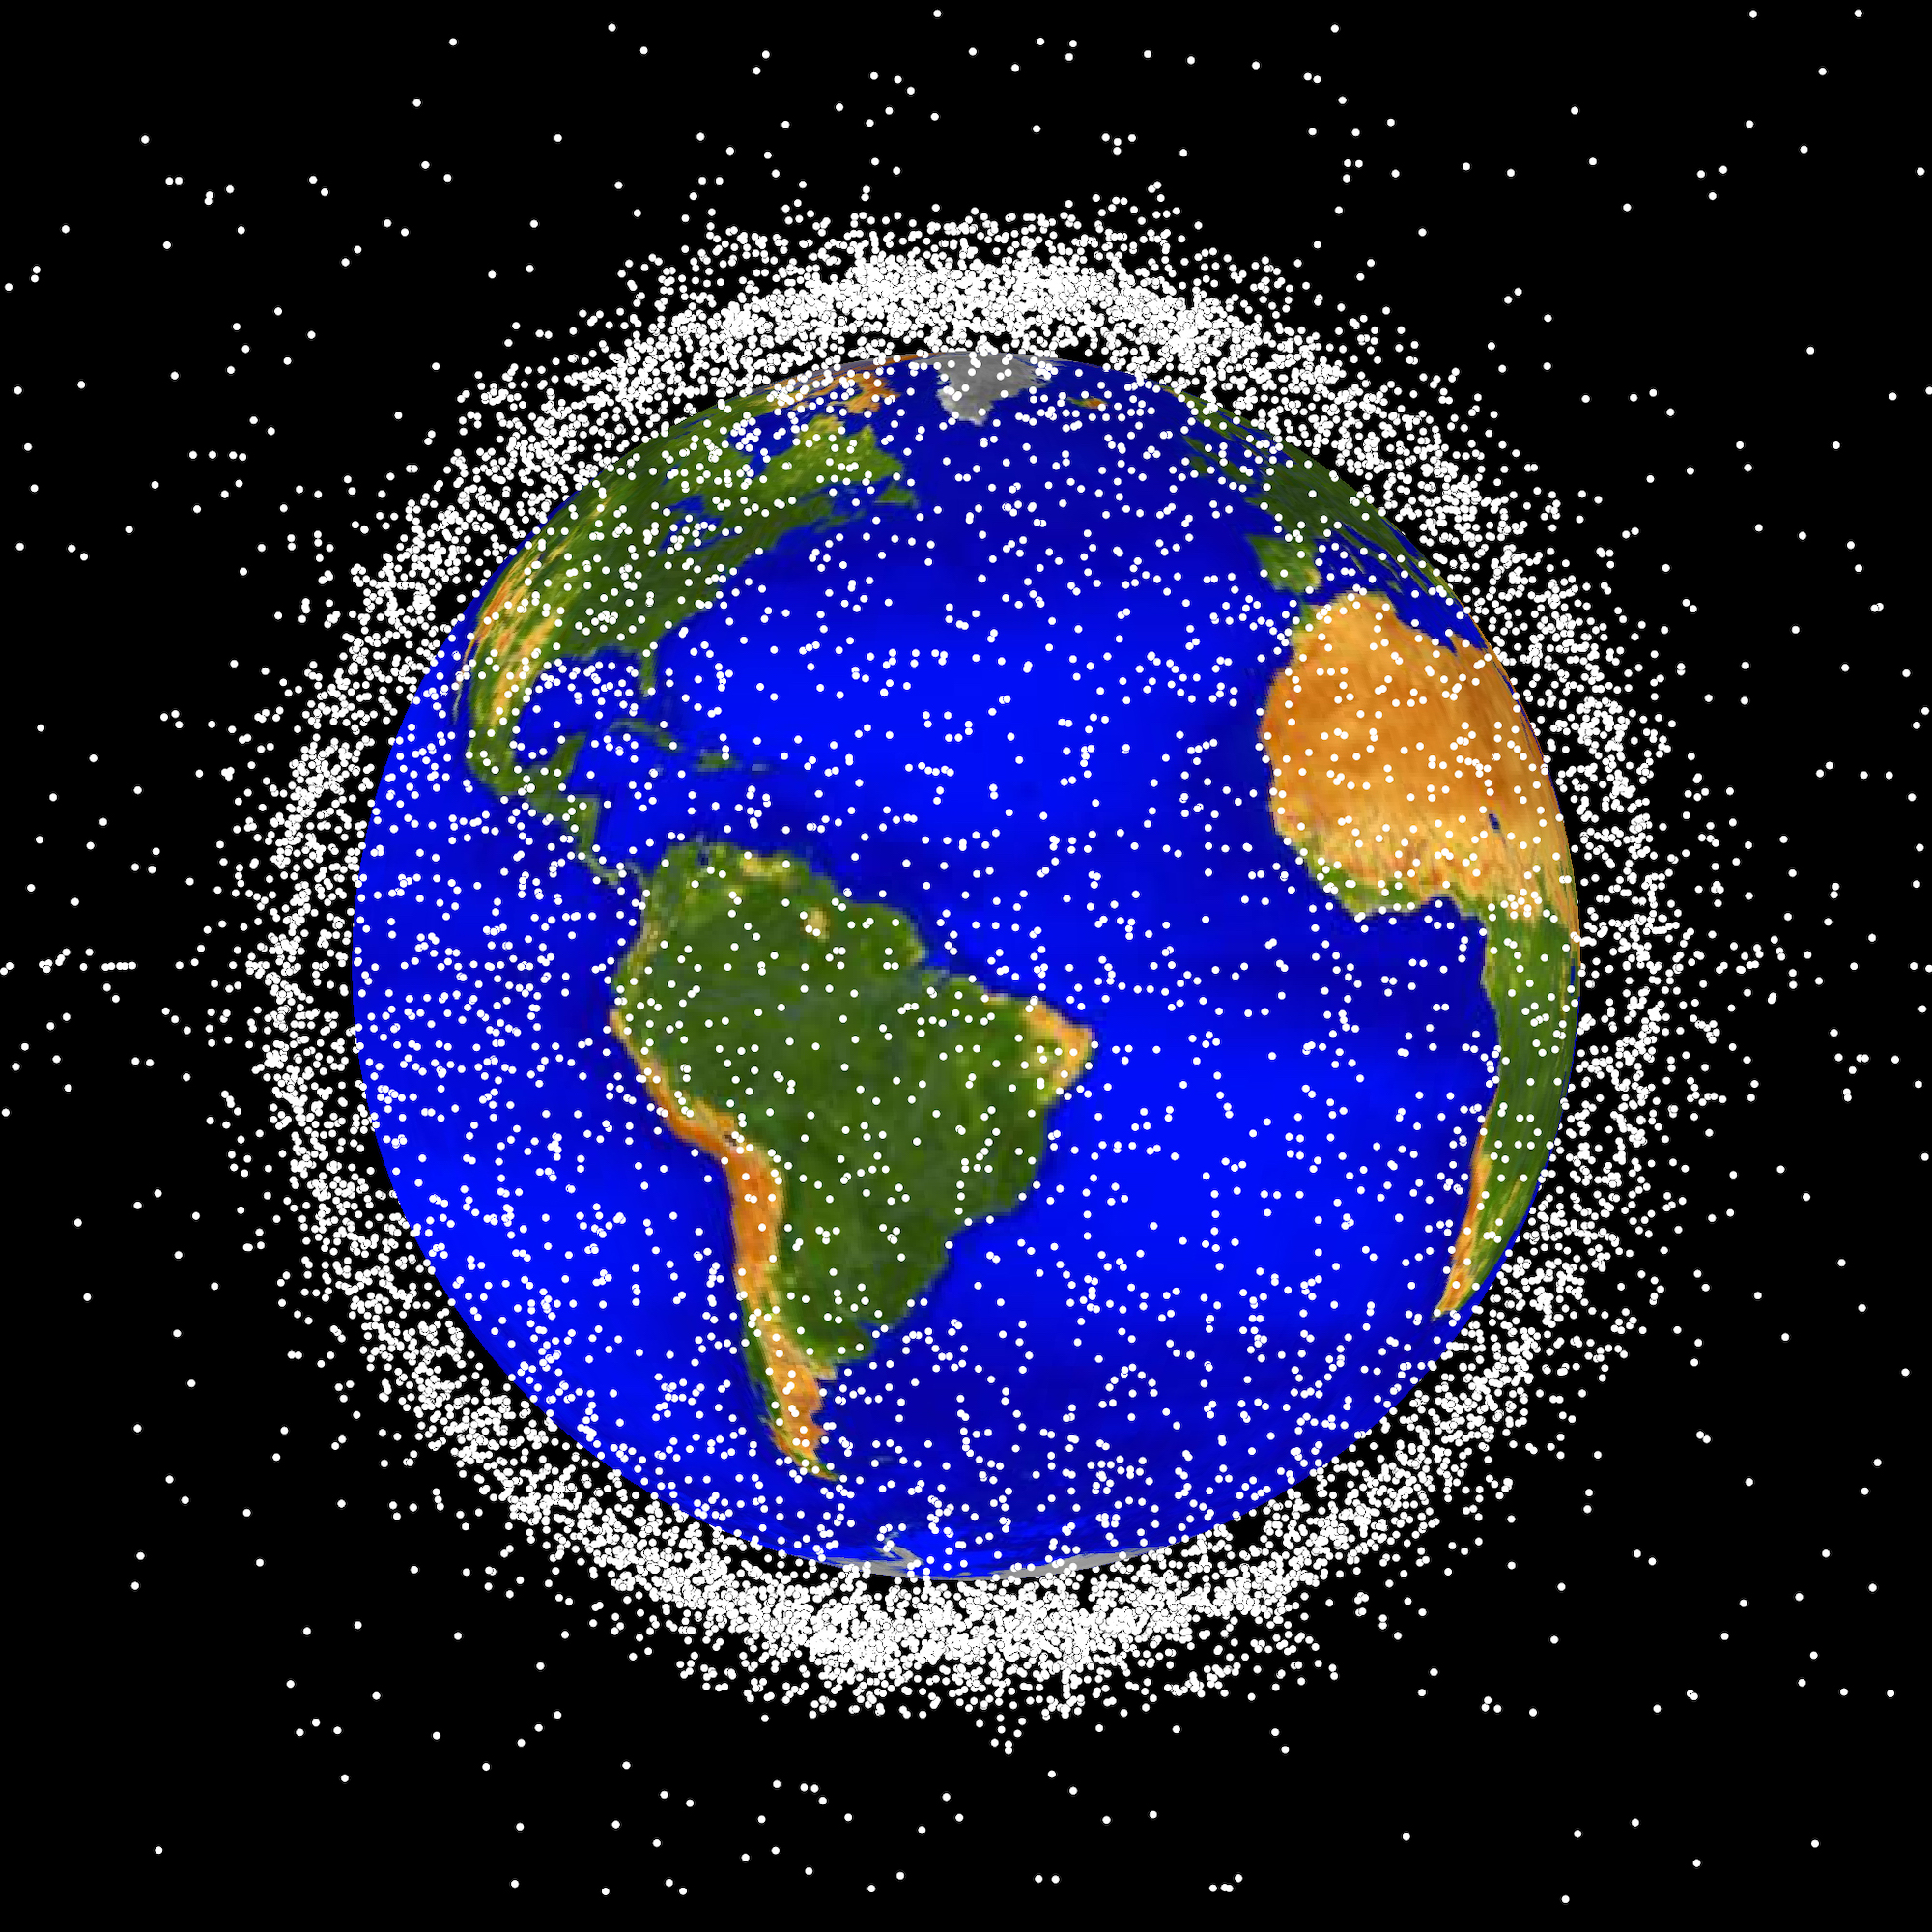 This week’s destroyed Russian satellite created even more dangerous space debris